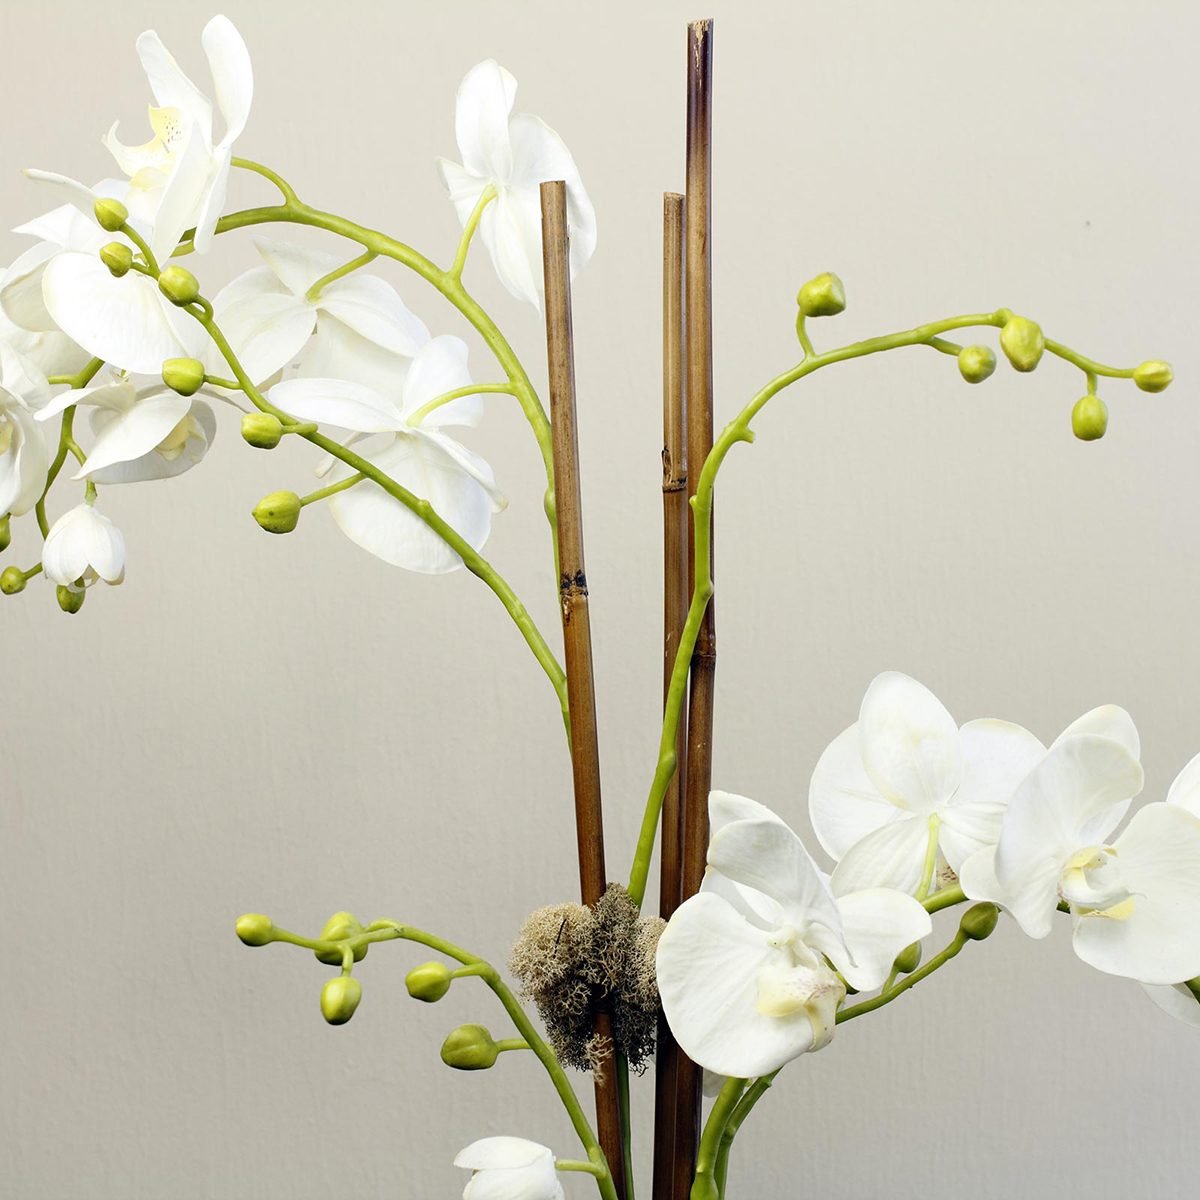 Artificial flower plant of silk white orchids with green buds and two wooden supports.